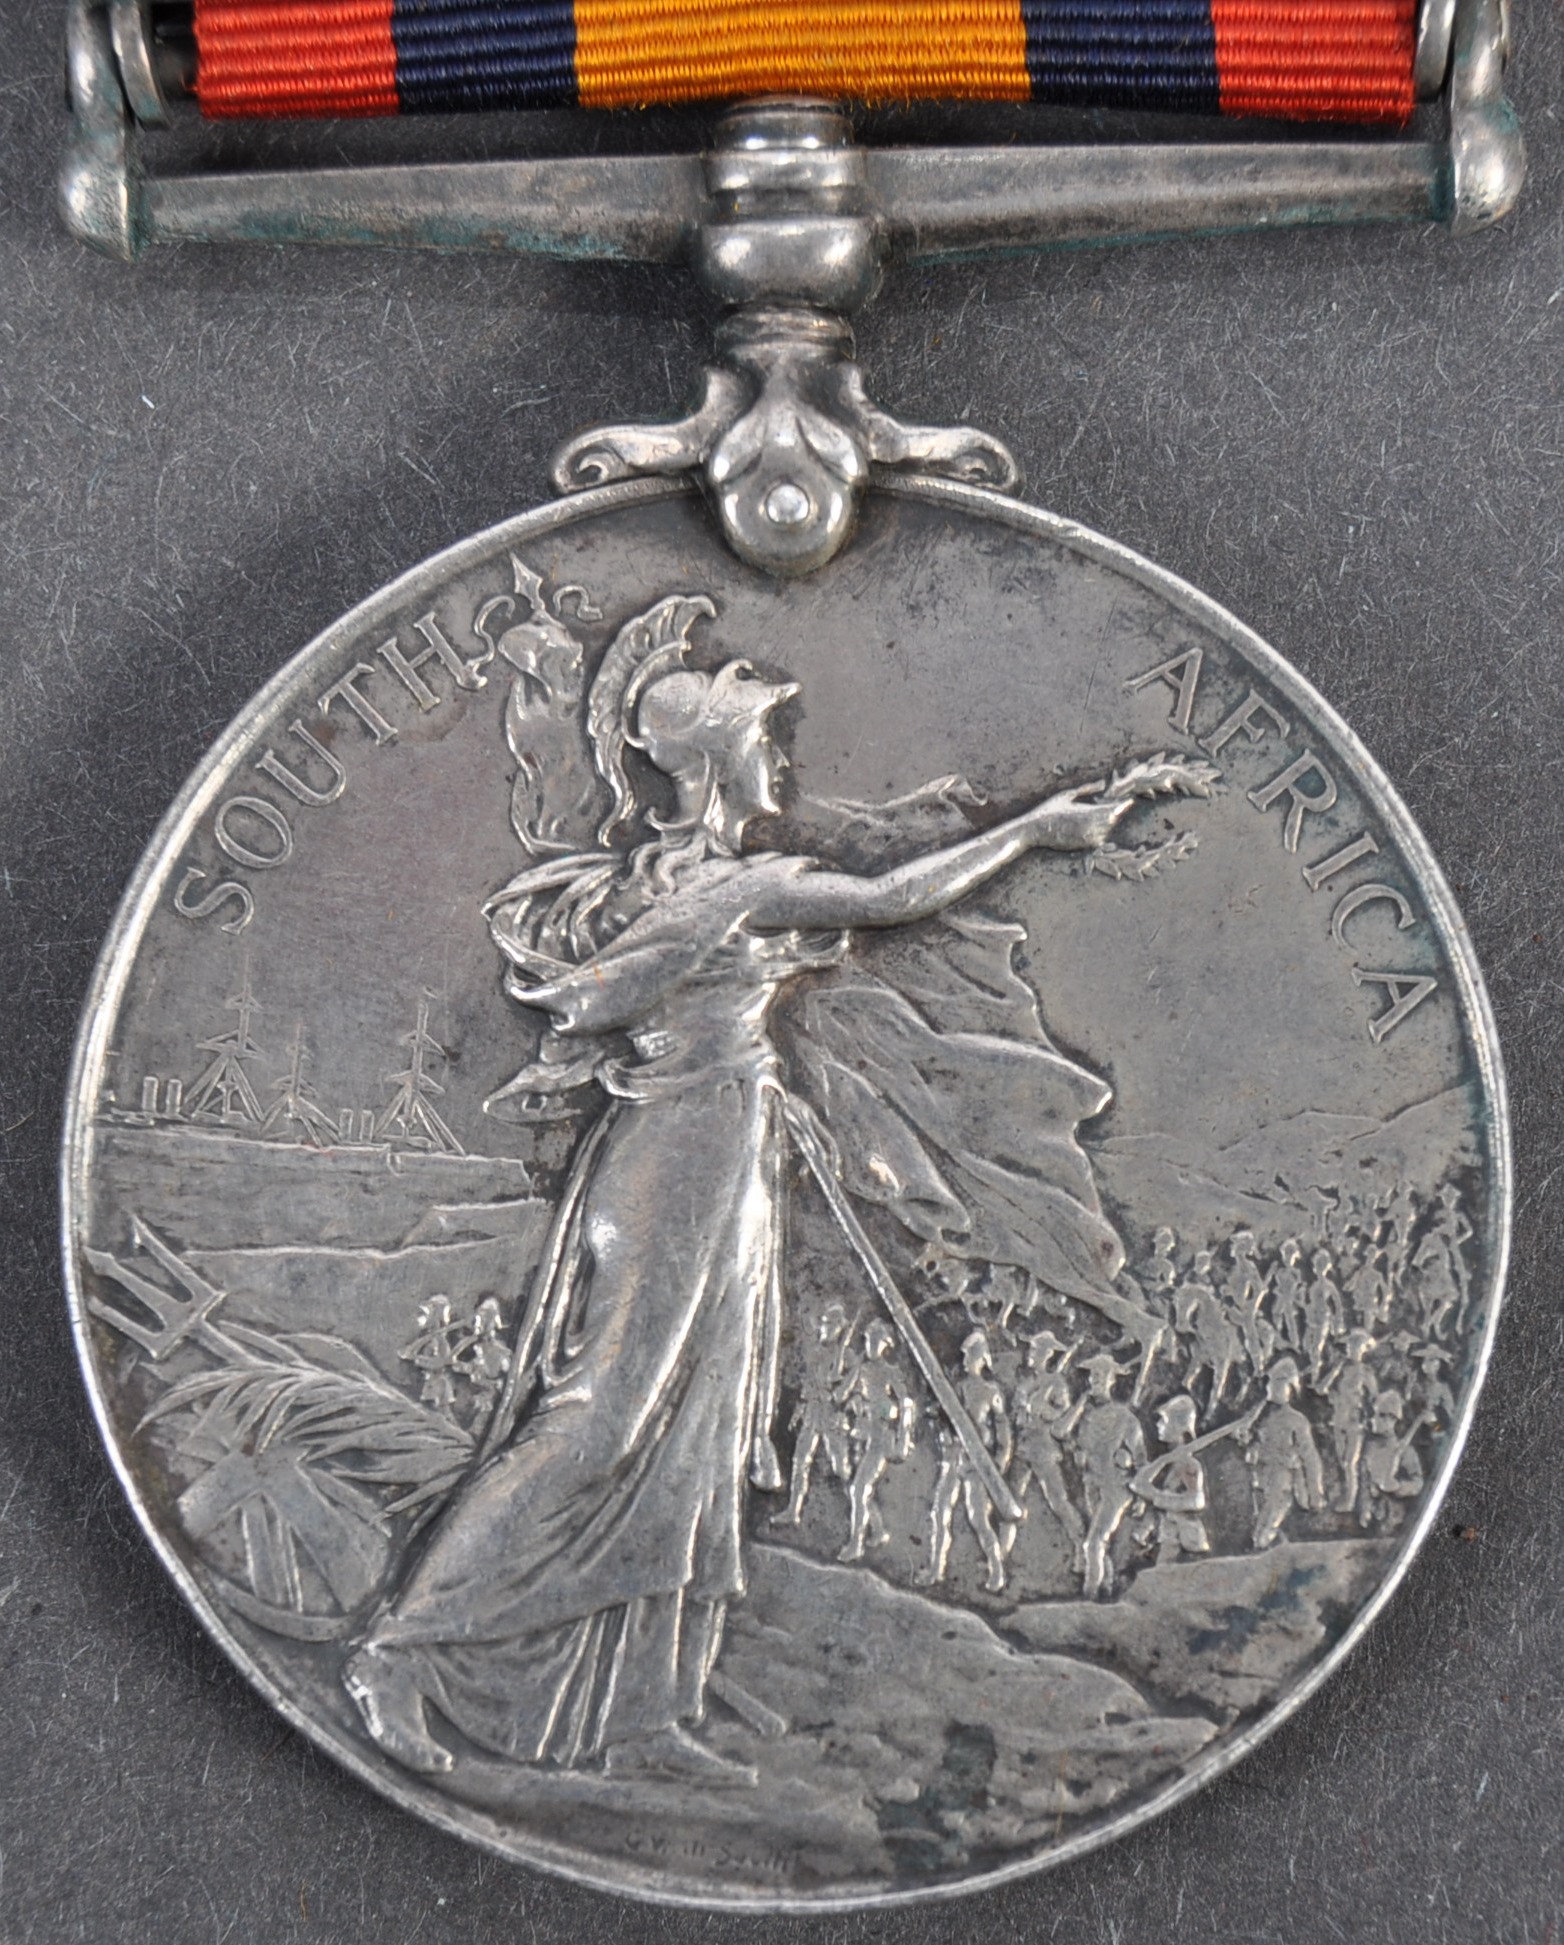 BOER WAR QUEEN'S SOUTH AFRICAN WAR MEDAL WITH CLASPS - Image 3 of 5